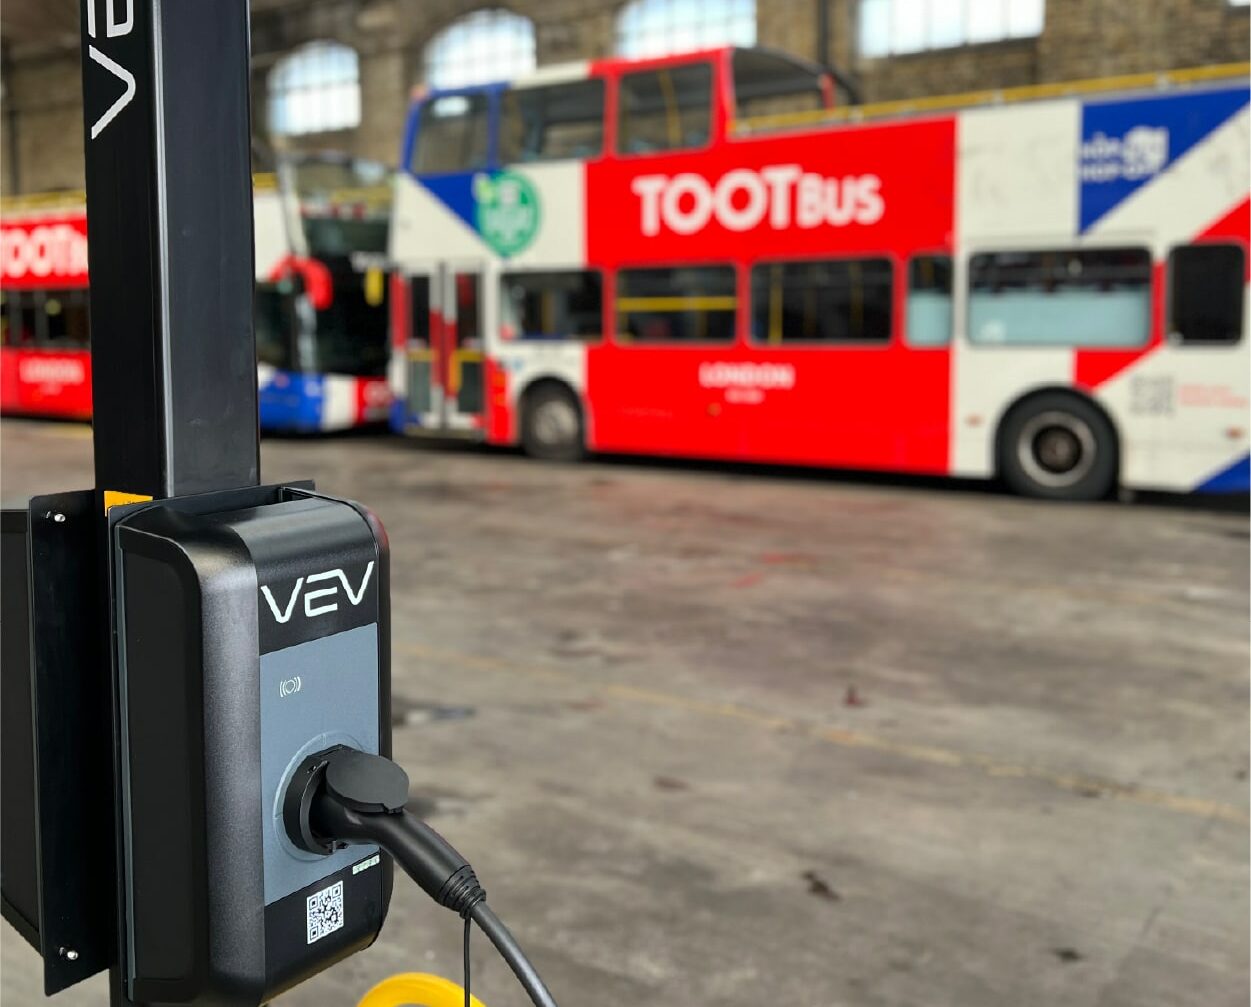 Design, build, operate: how VEV is powering Tootbus’ fleet electrification strategy